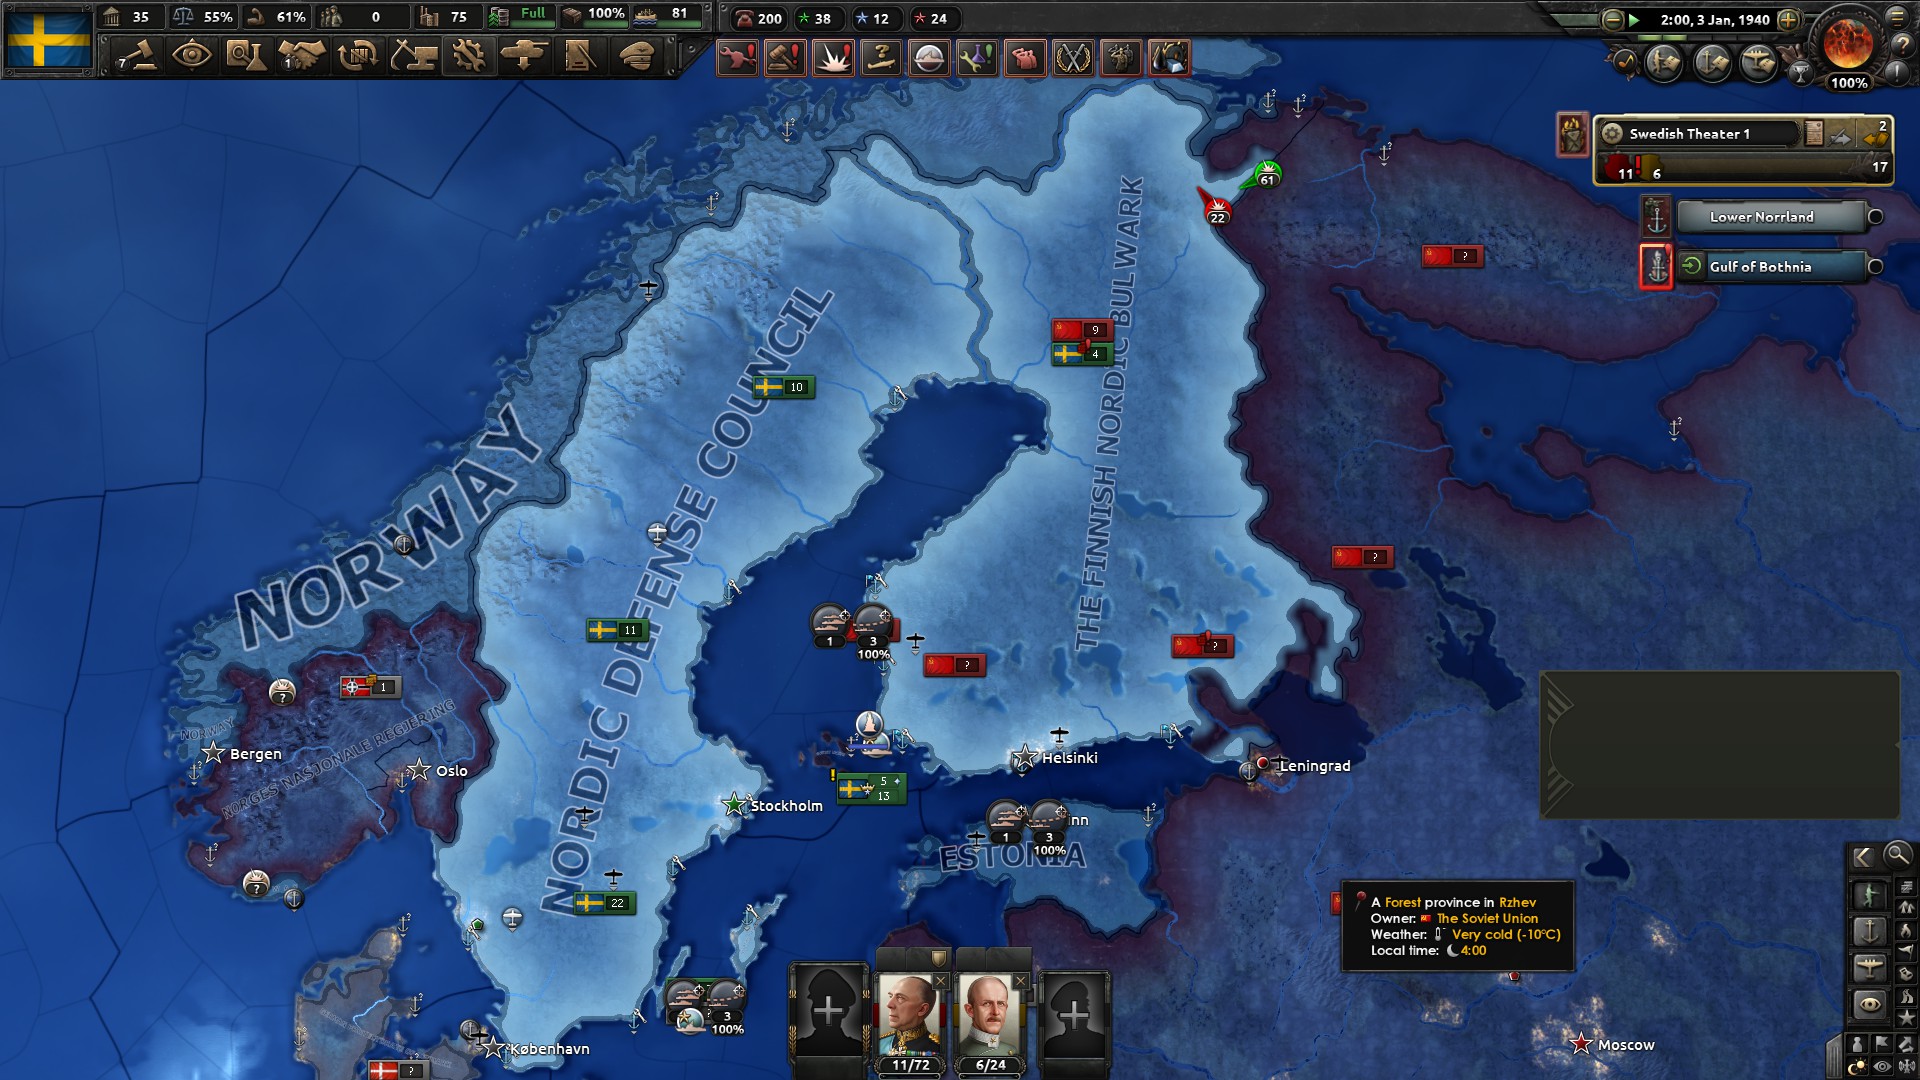 I am intrigued by Paradox's 'Hearts of Iron IV' and 'Stellaris